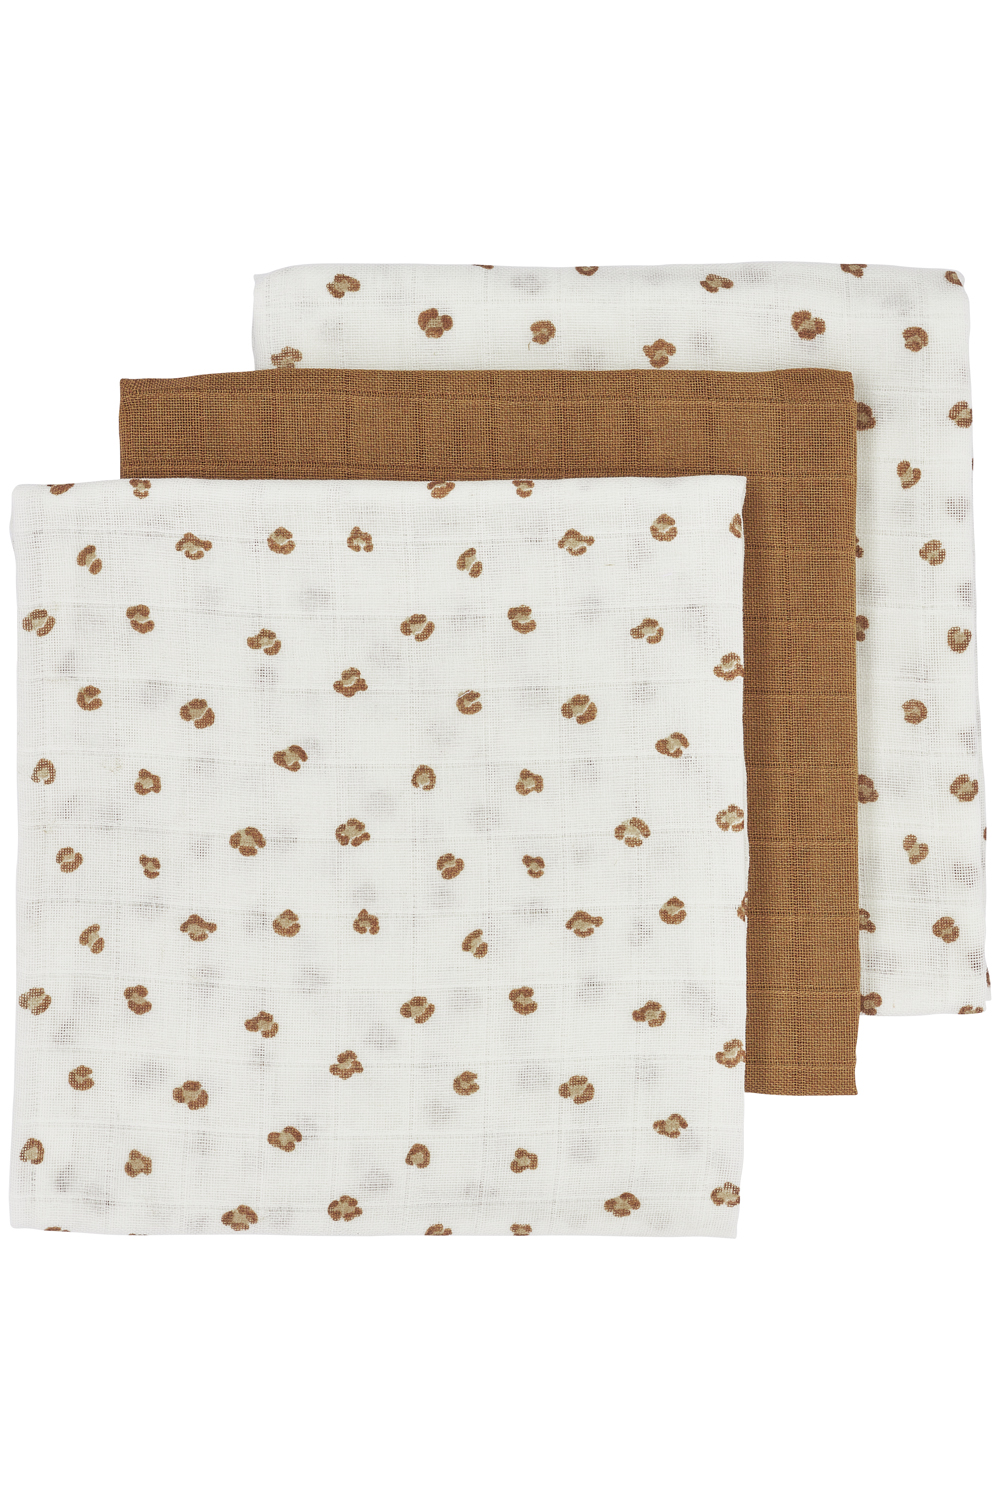 Mullwindeln 3er pack Mini Panther - toffee - 70x70cm